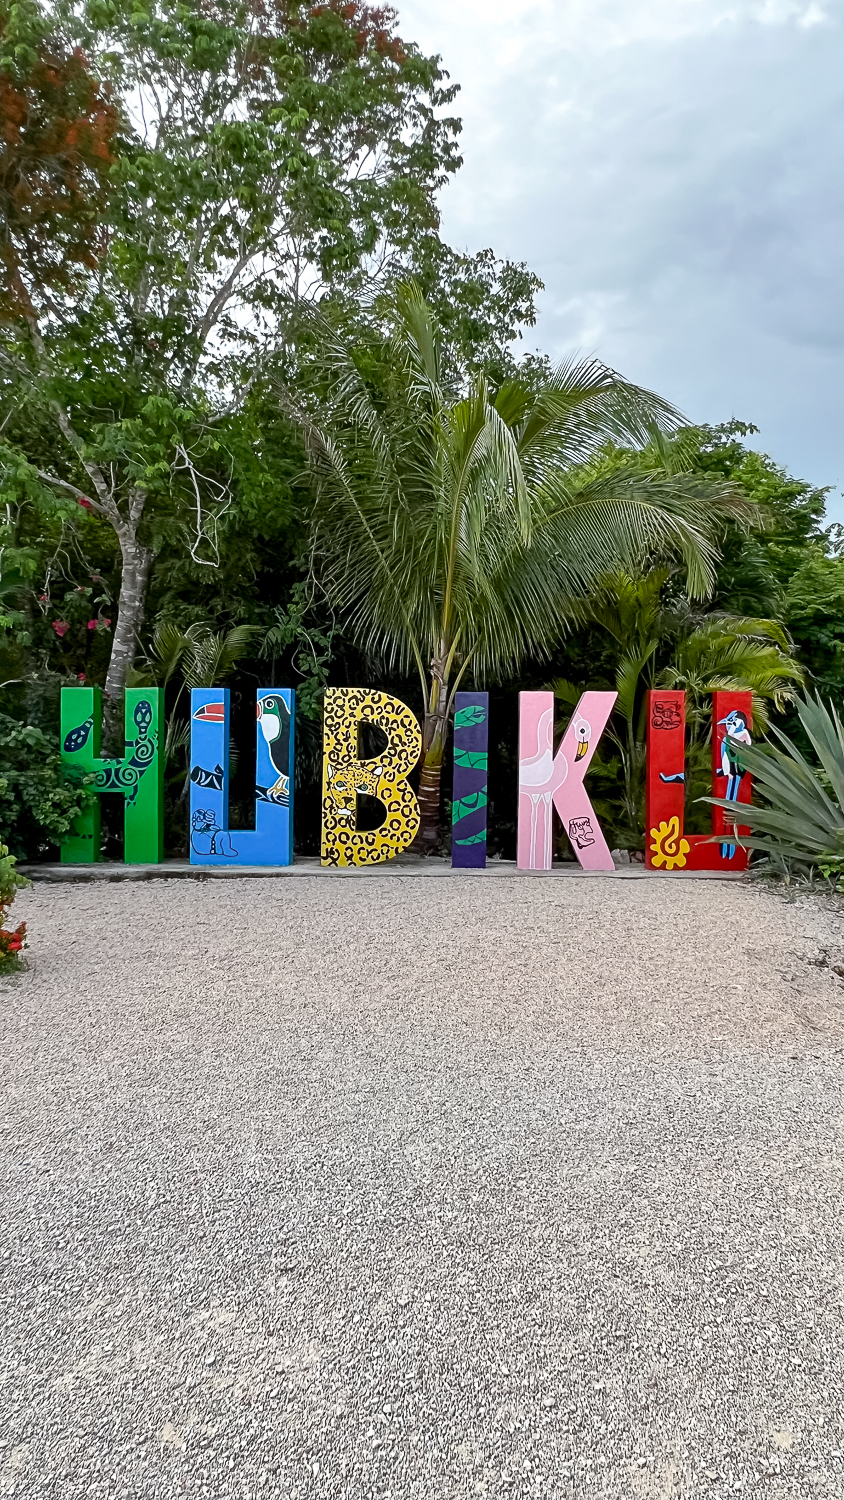 Pacific Globetrotters, budget family travel blog, shares the Best Cenotes In Cancun. Hubiku